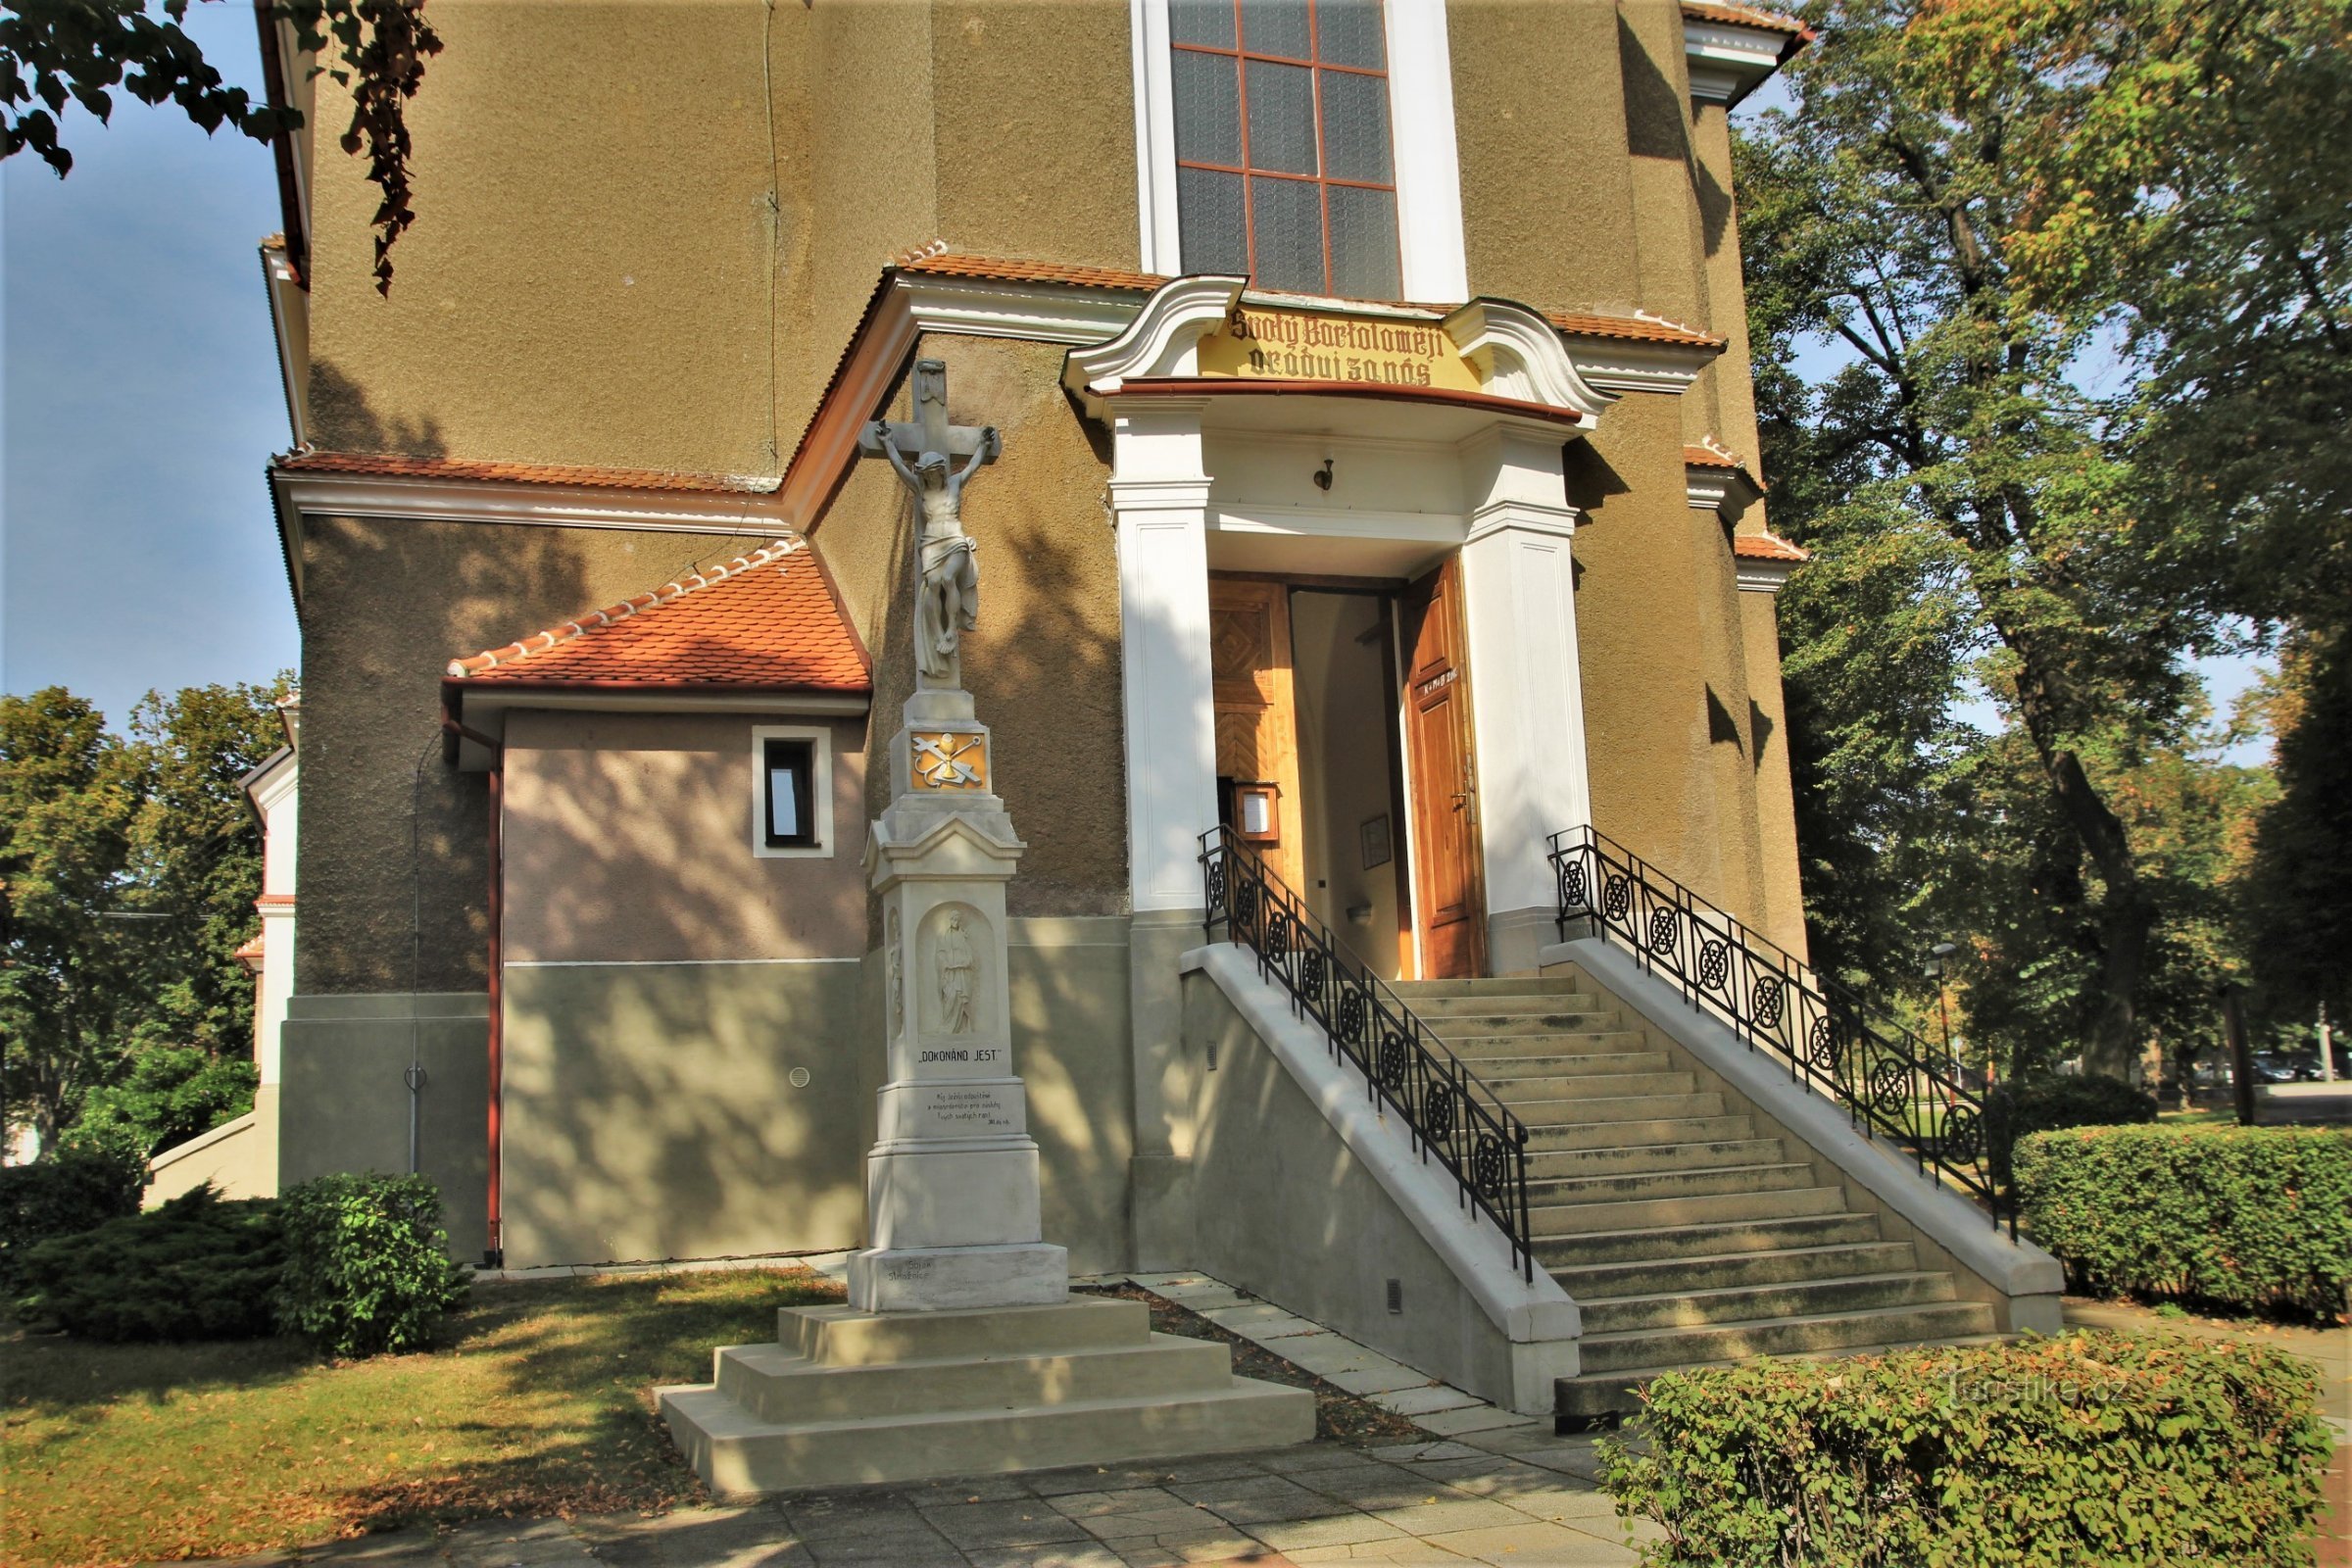 Entrance to the church with a stone cross